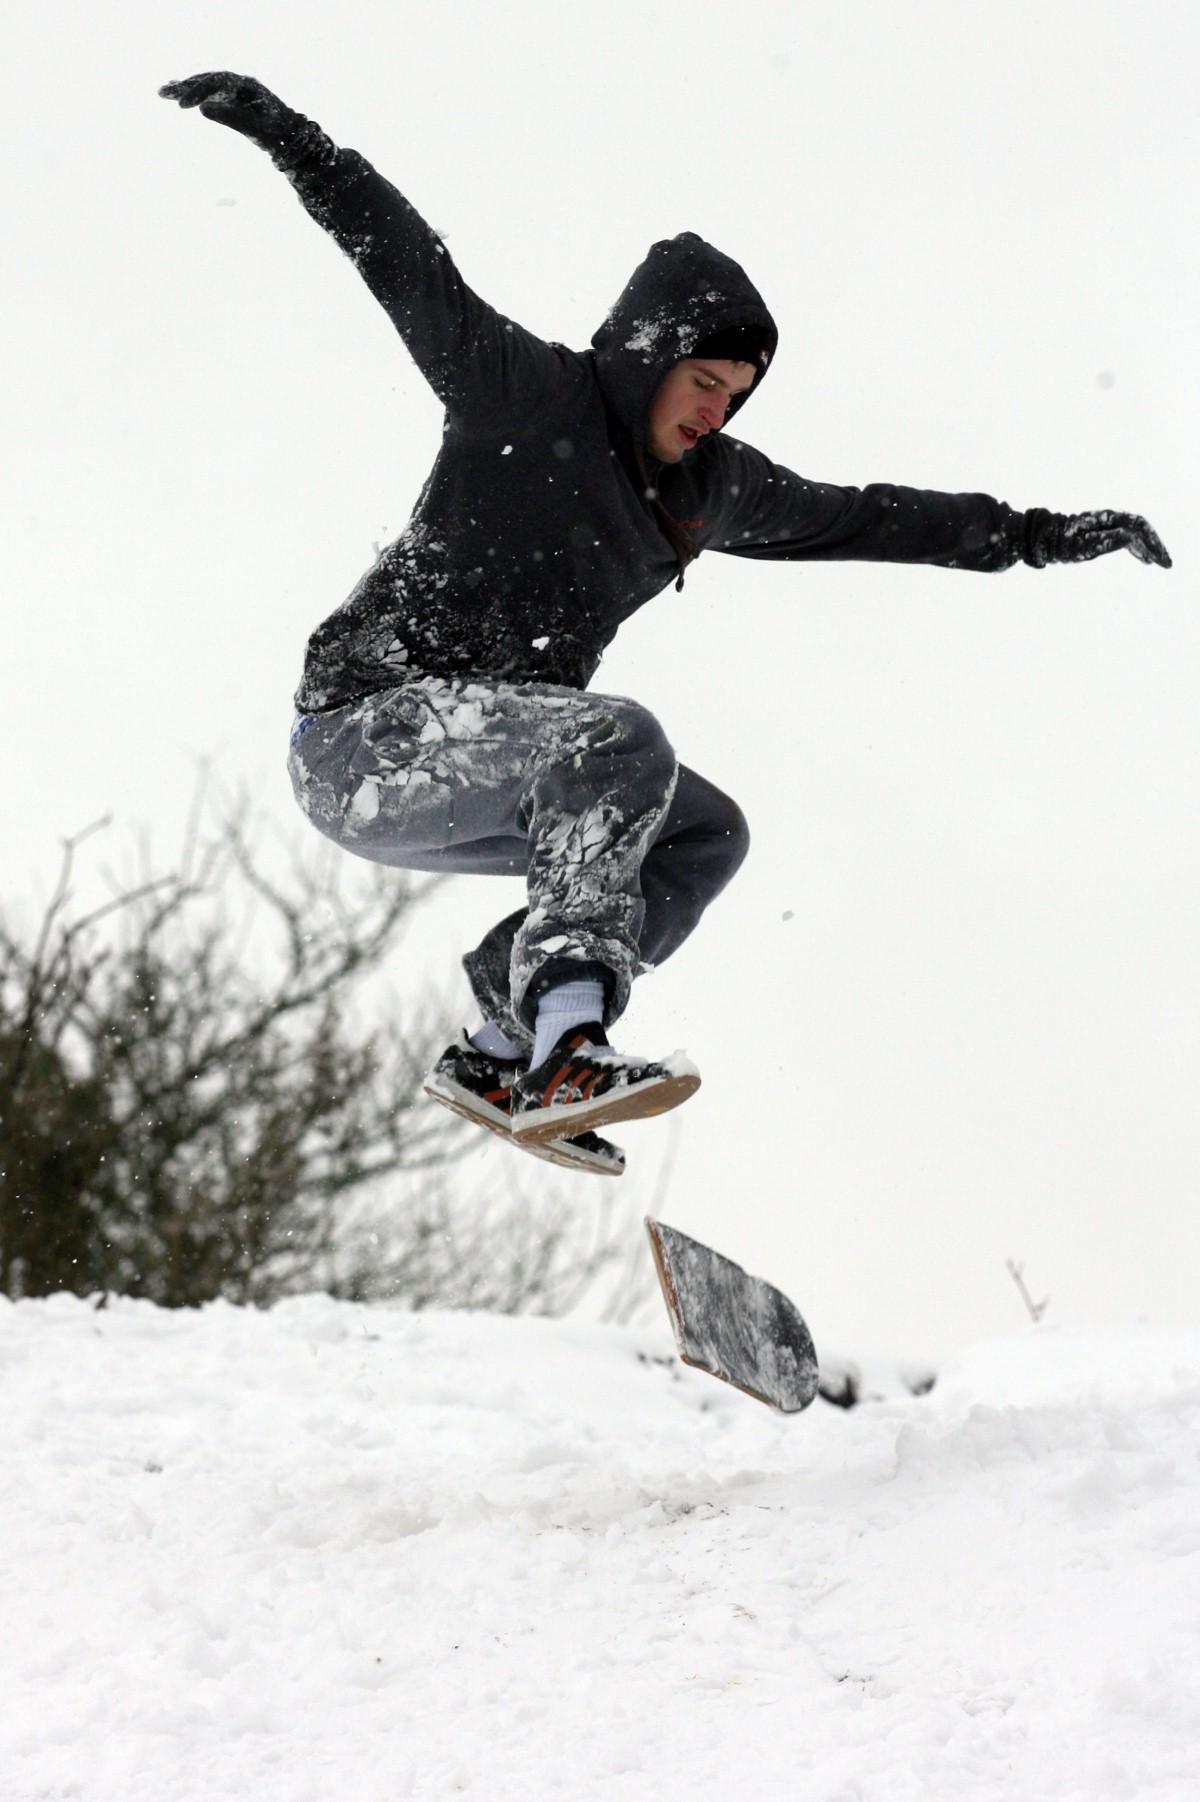 The Year in Pictures - 2013 - When snow hit the New Forest, Nick Richardson used an adapted skateboard at Botons Bench in Lyndhurst. January 18, 2013.